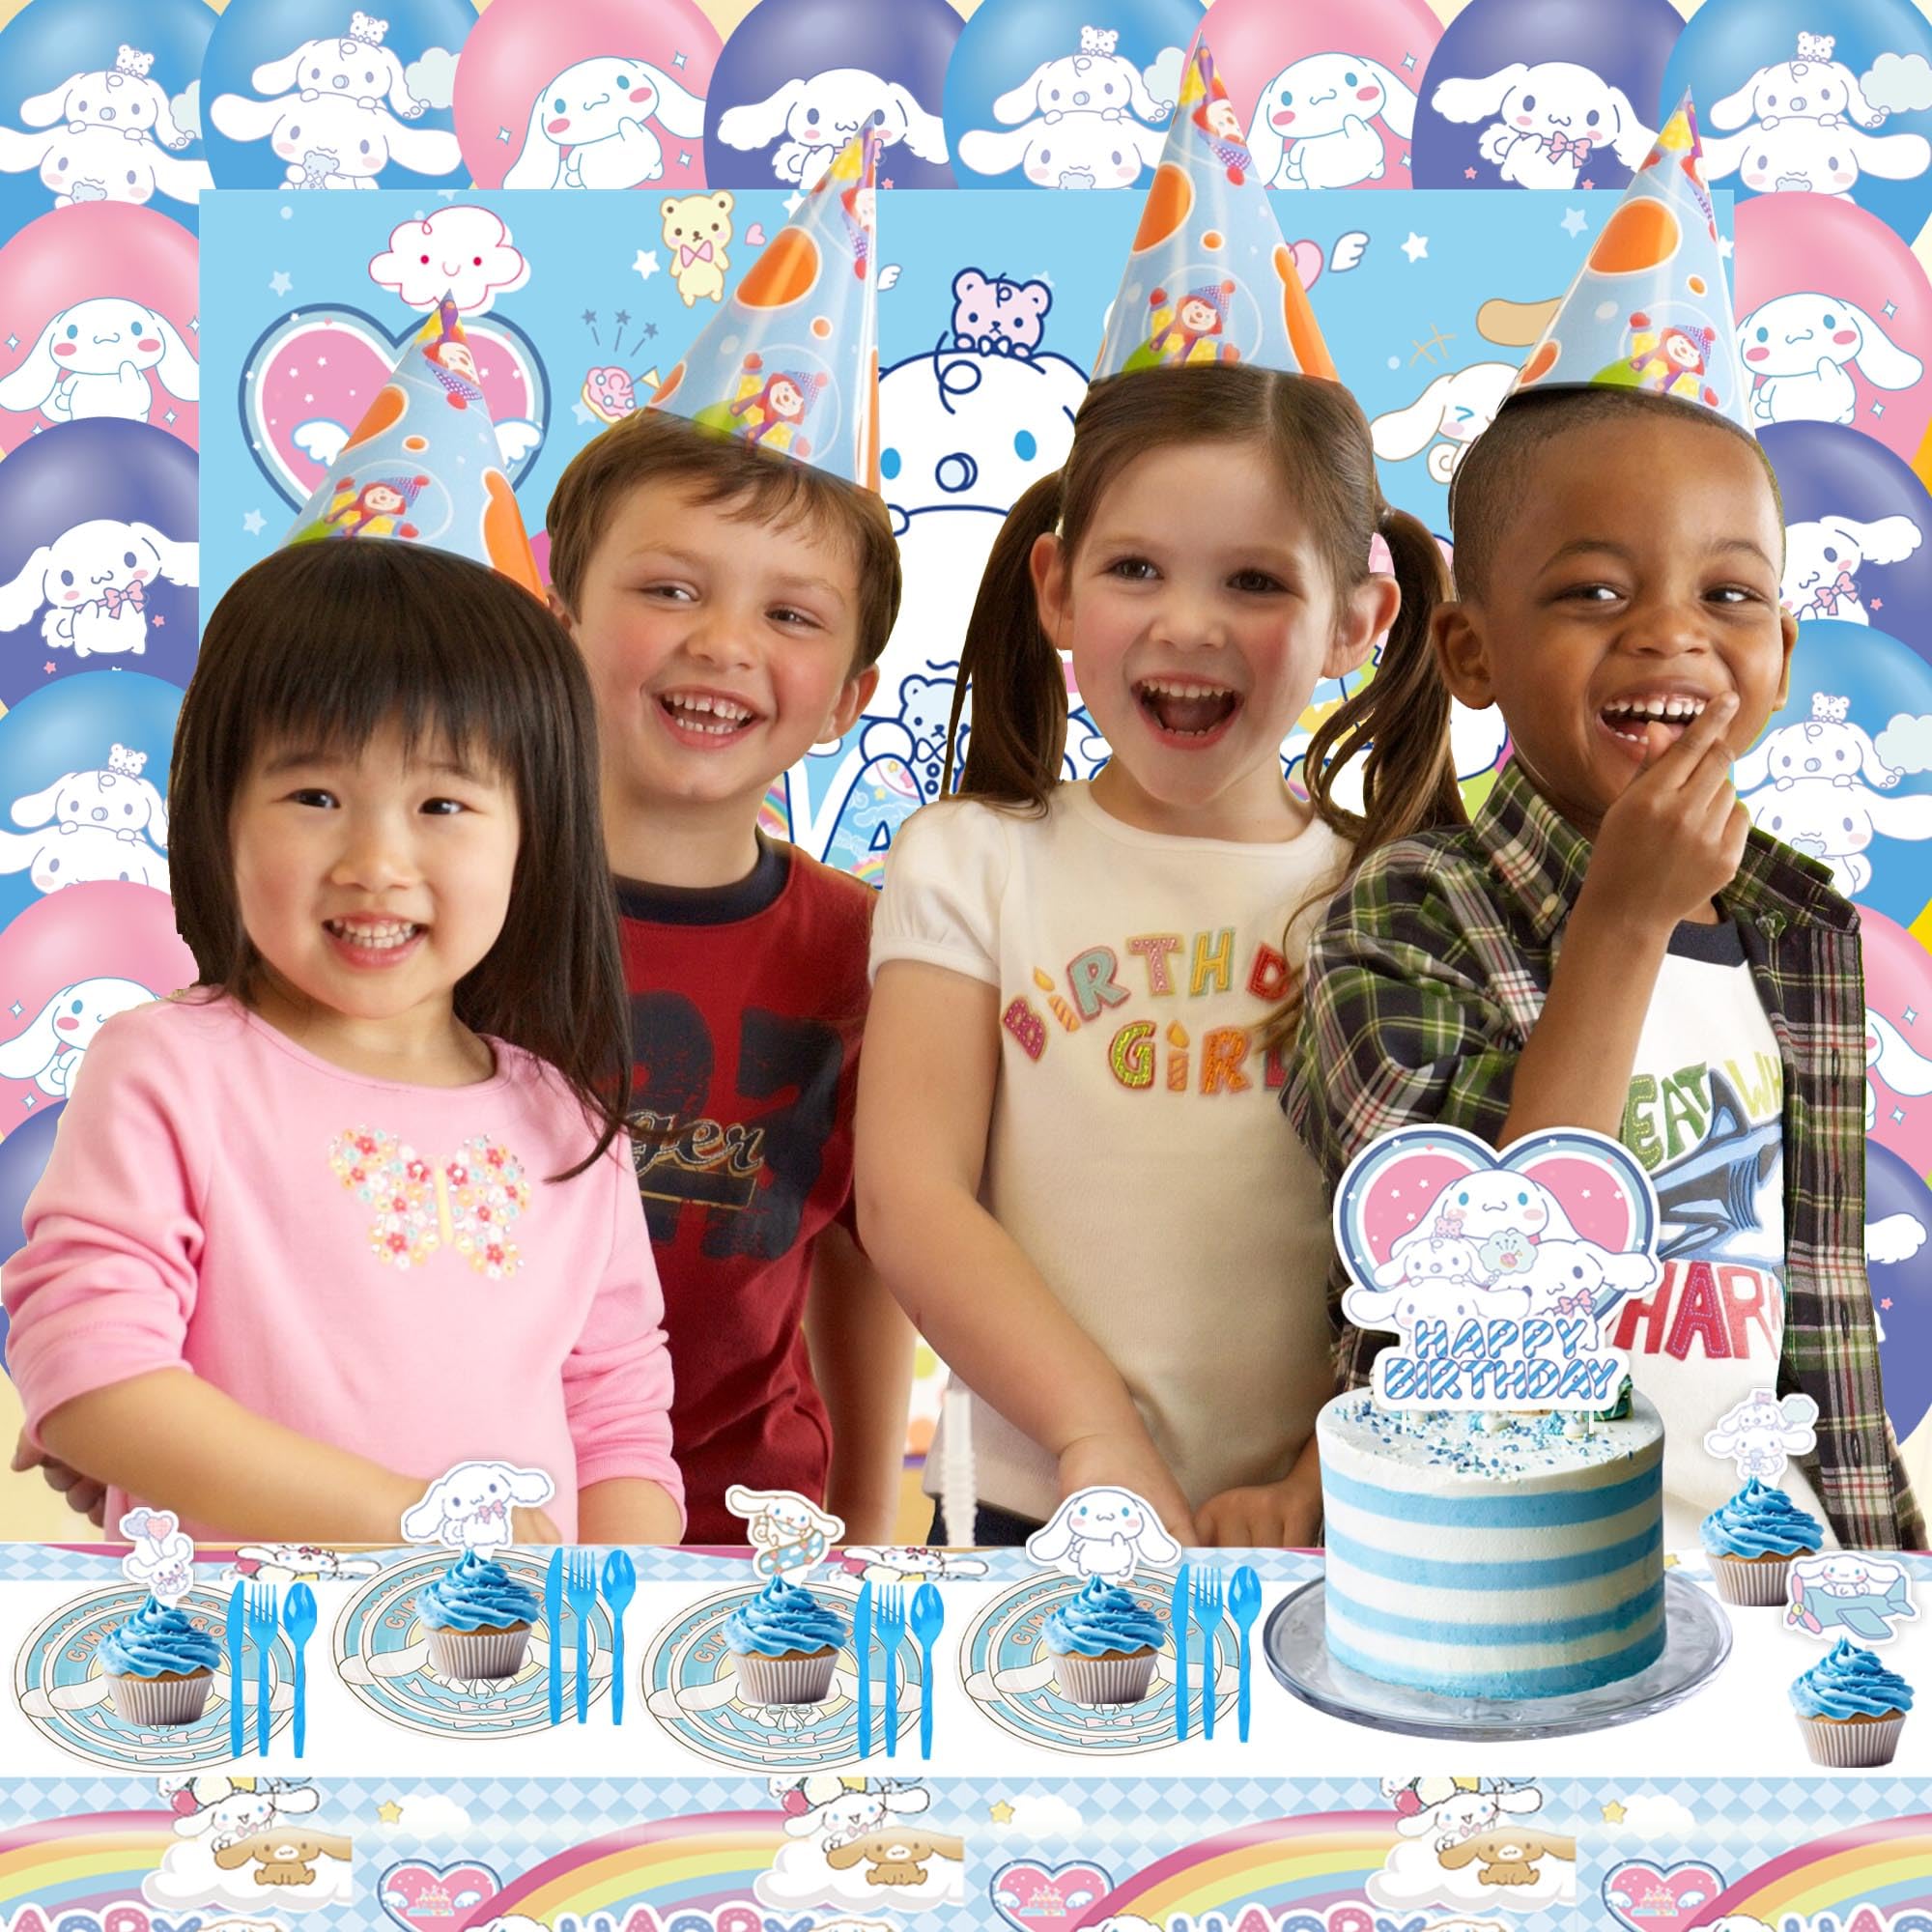 Cute Birthday Party Decorations, Kawaii Birthday Decorations for Kids Include Plates, Tablecloth, Tableware, Cupcake Toppers, Balloons, Backdrop Kits Set